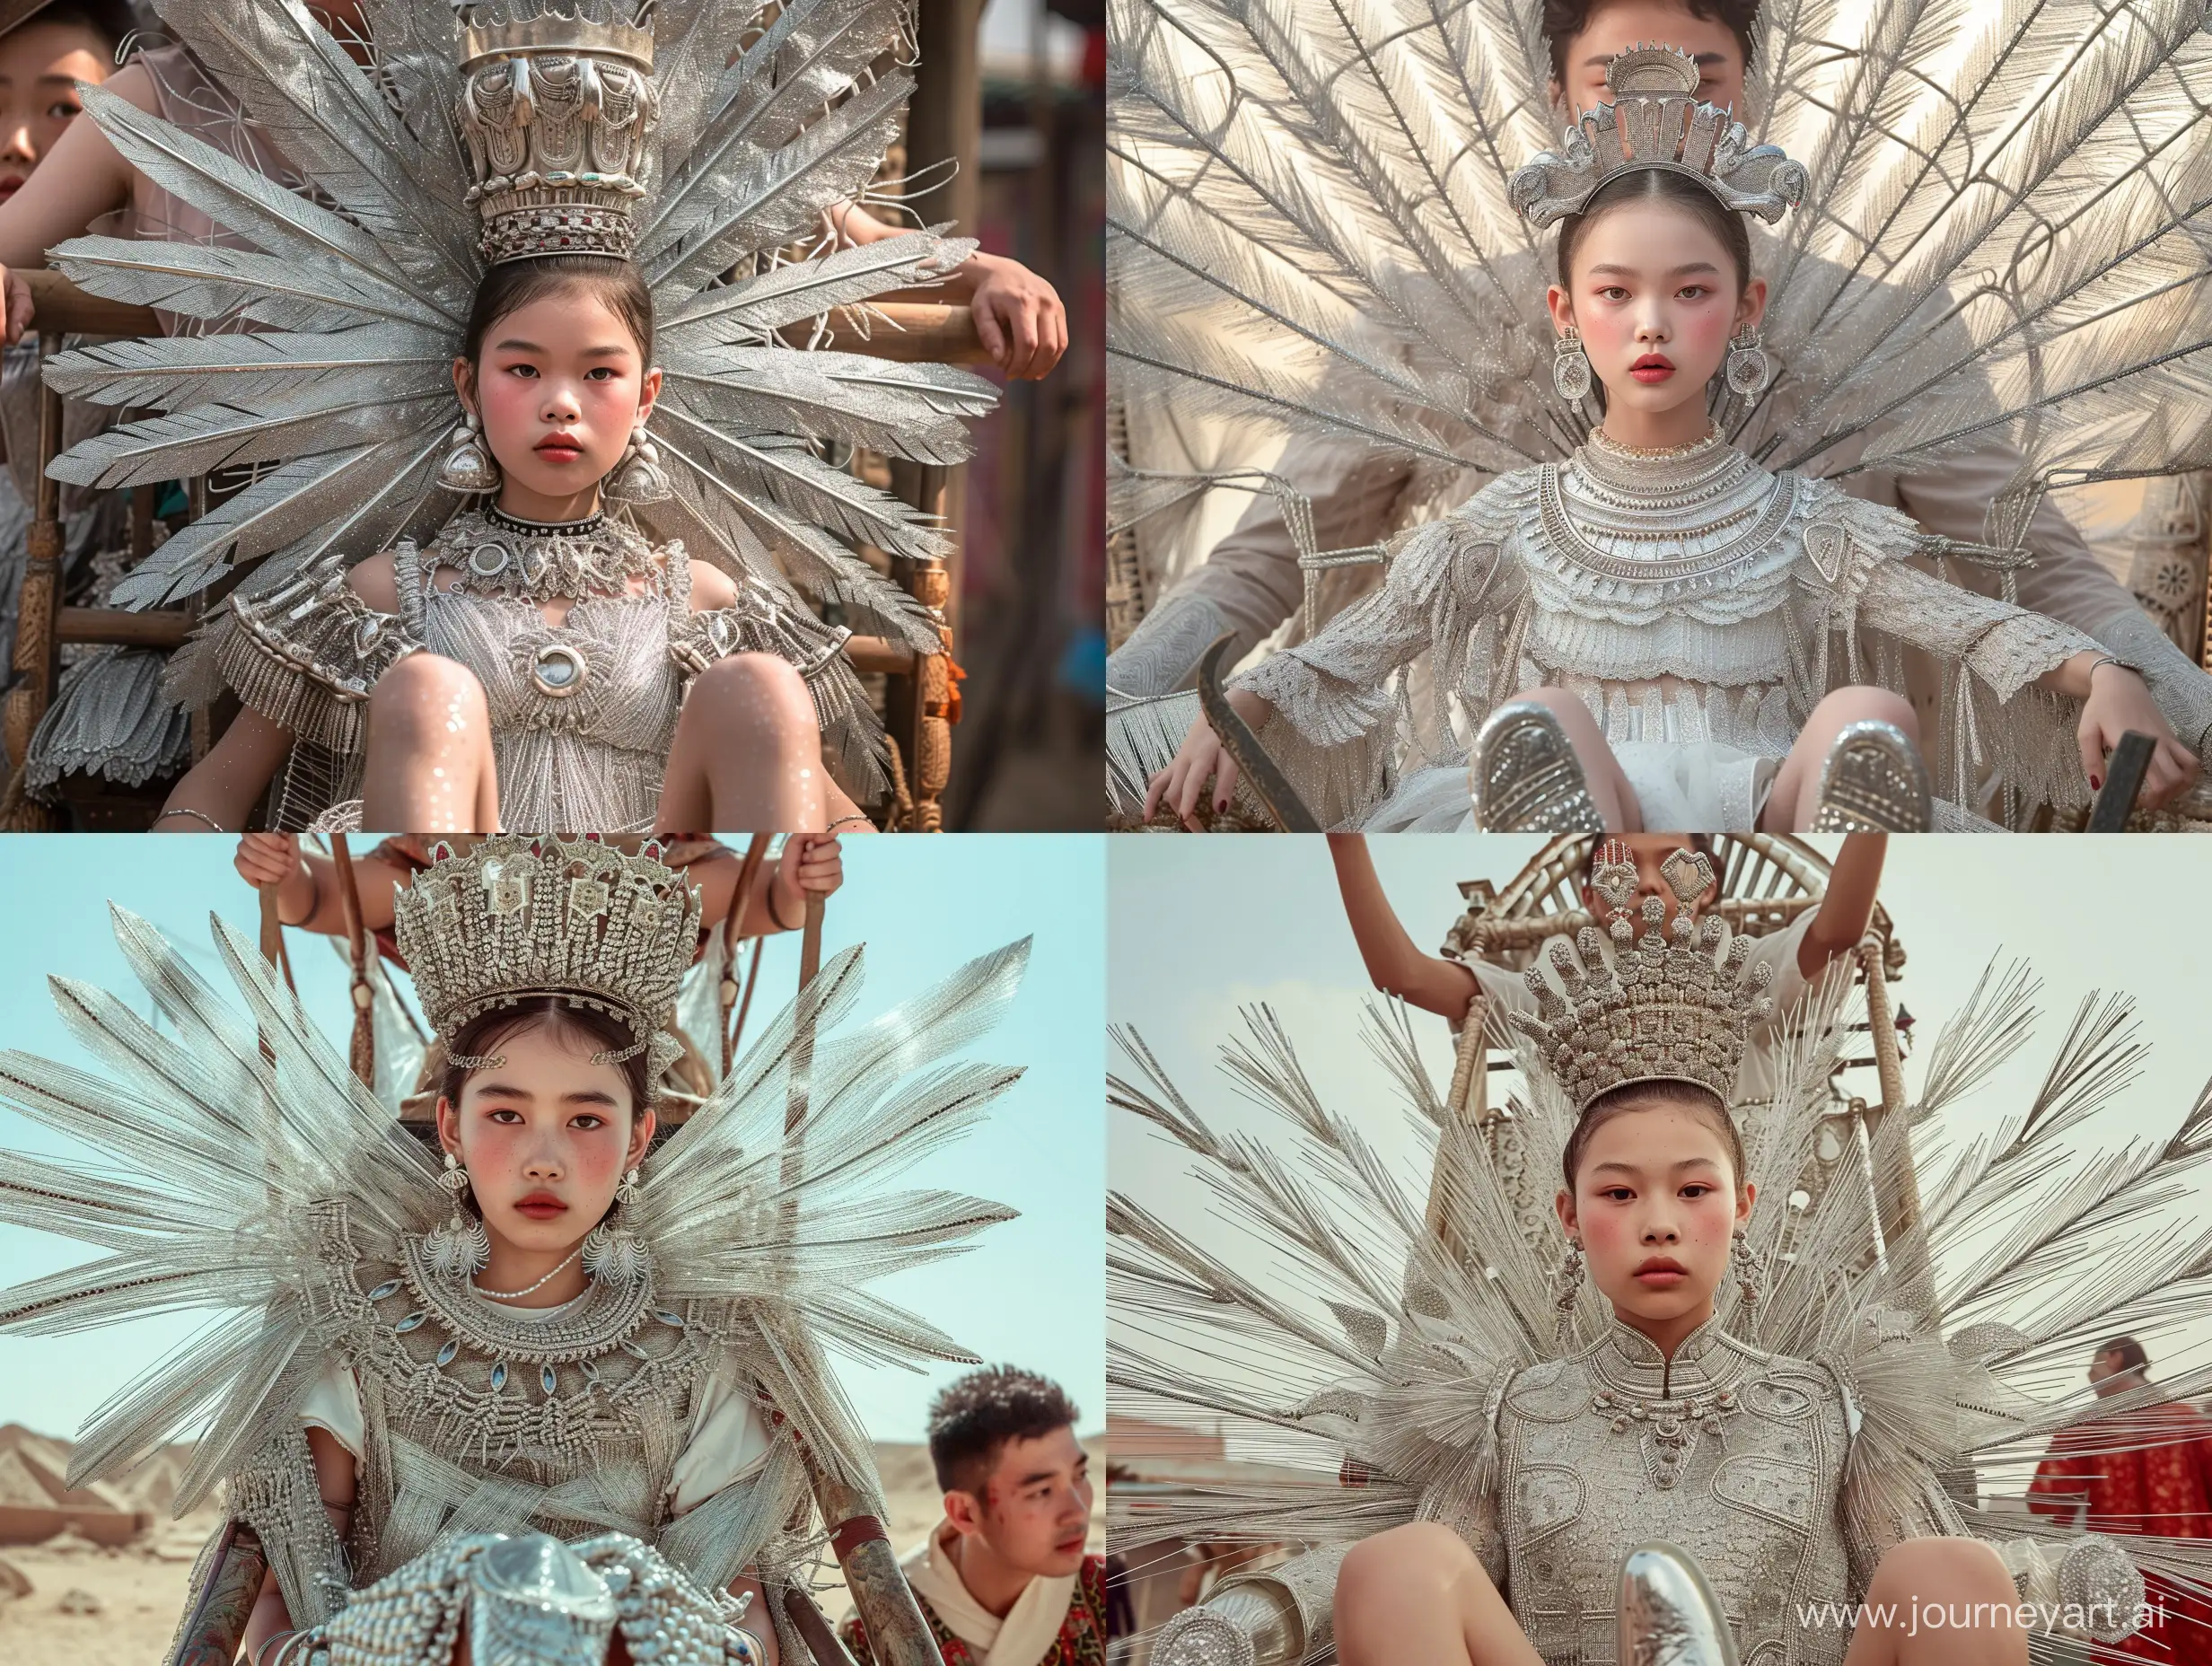 Realistic representation of a young Asian girl, 22 years old, wearing a meticulously detailed silver costume made from small thin silver threads, intricate patterns woven together, silver shoes on her feet, and a metal crown on her head. into rays like feather structures made from silver, her expression was cold, her cheeks were rosy, her earrings and necklace were woven from meticulously detailed silver, she sat on a palanquin like an Egyptian queen, the A strong young man carries her palanquin on his shoulders, the scene displays a classic Egyptian festival atmosphere